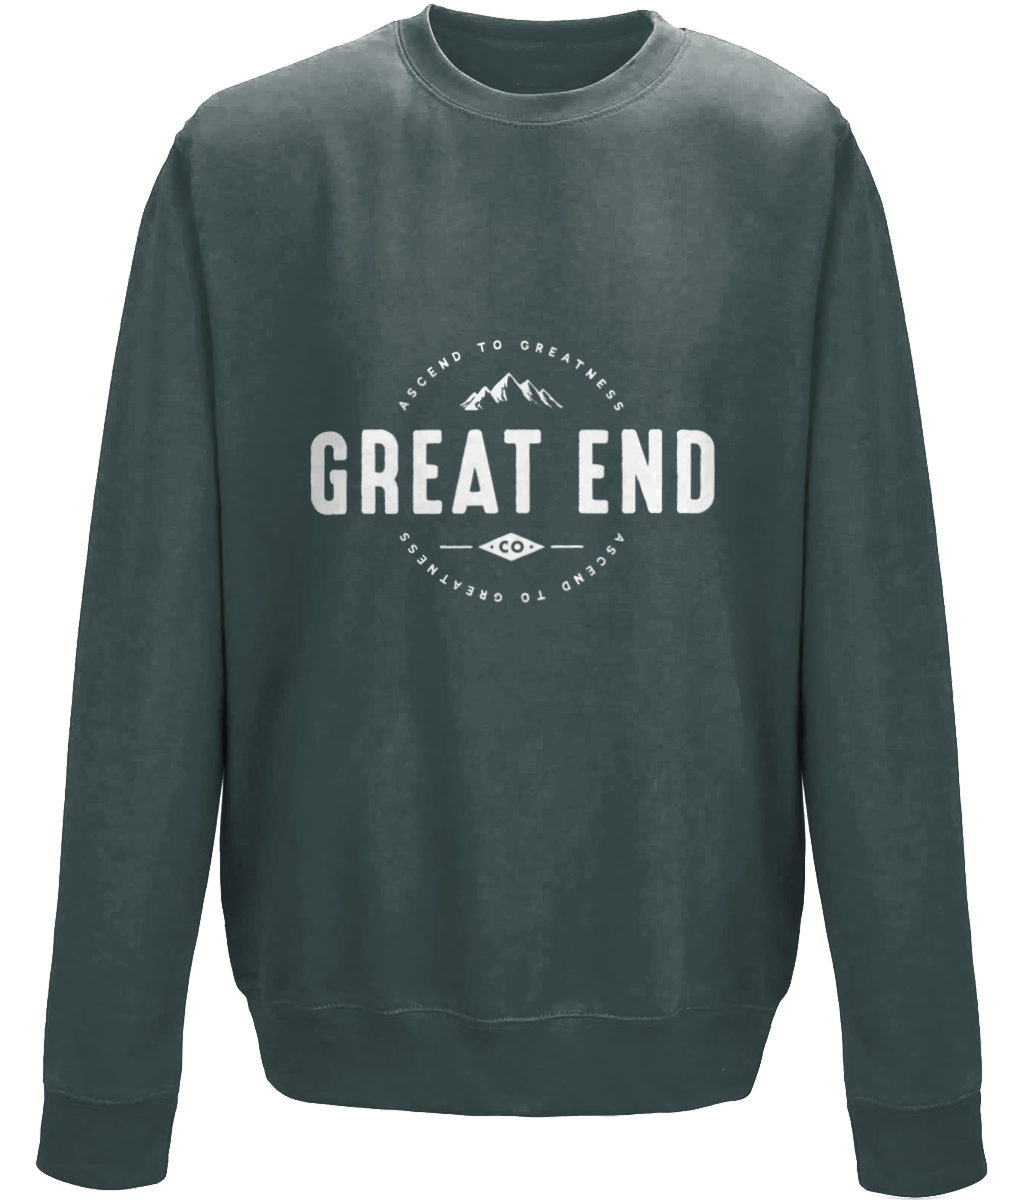 The Clothes Great Logo - Charcoal Sweatshirt with White Great End Logo